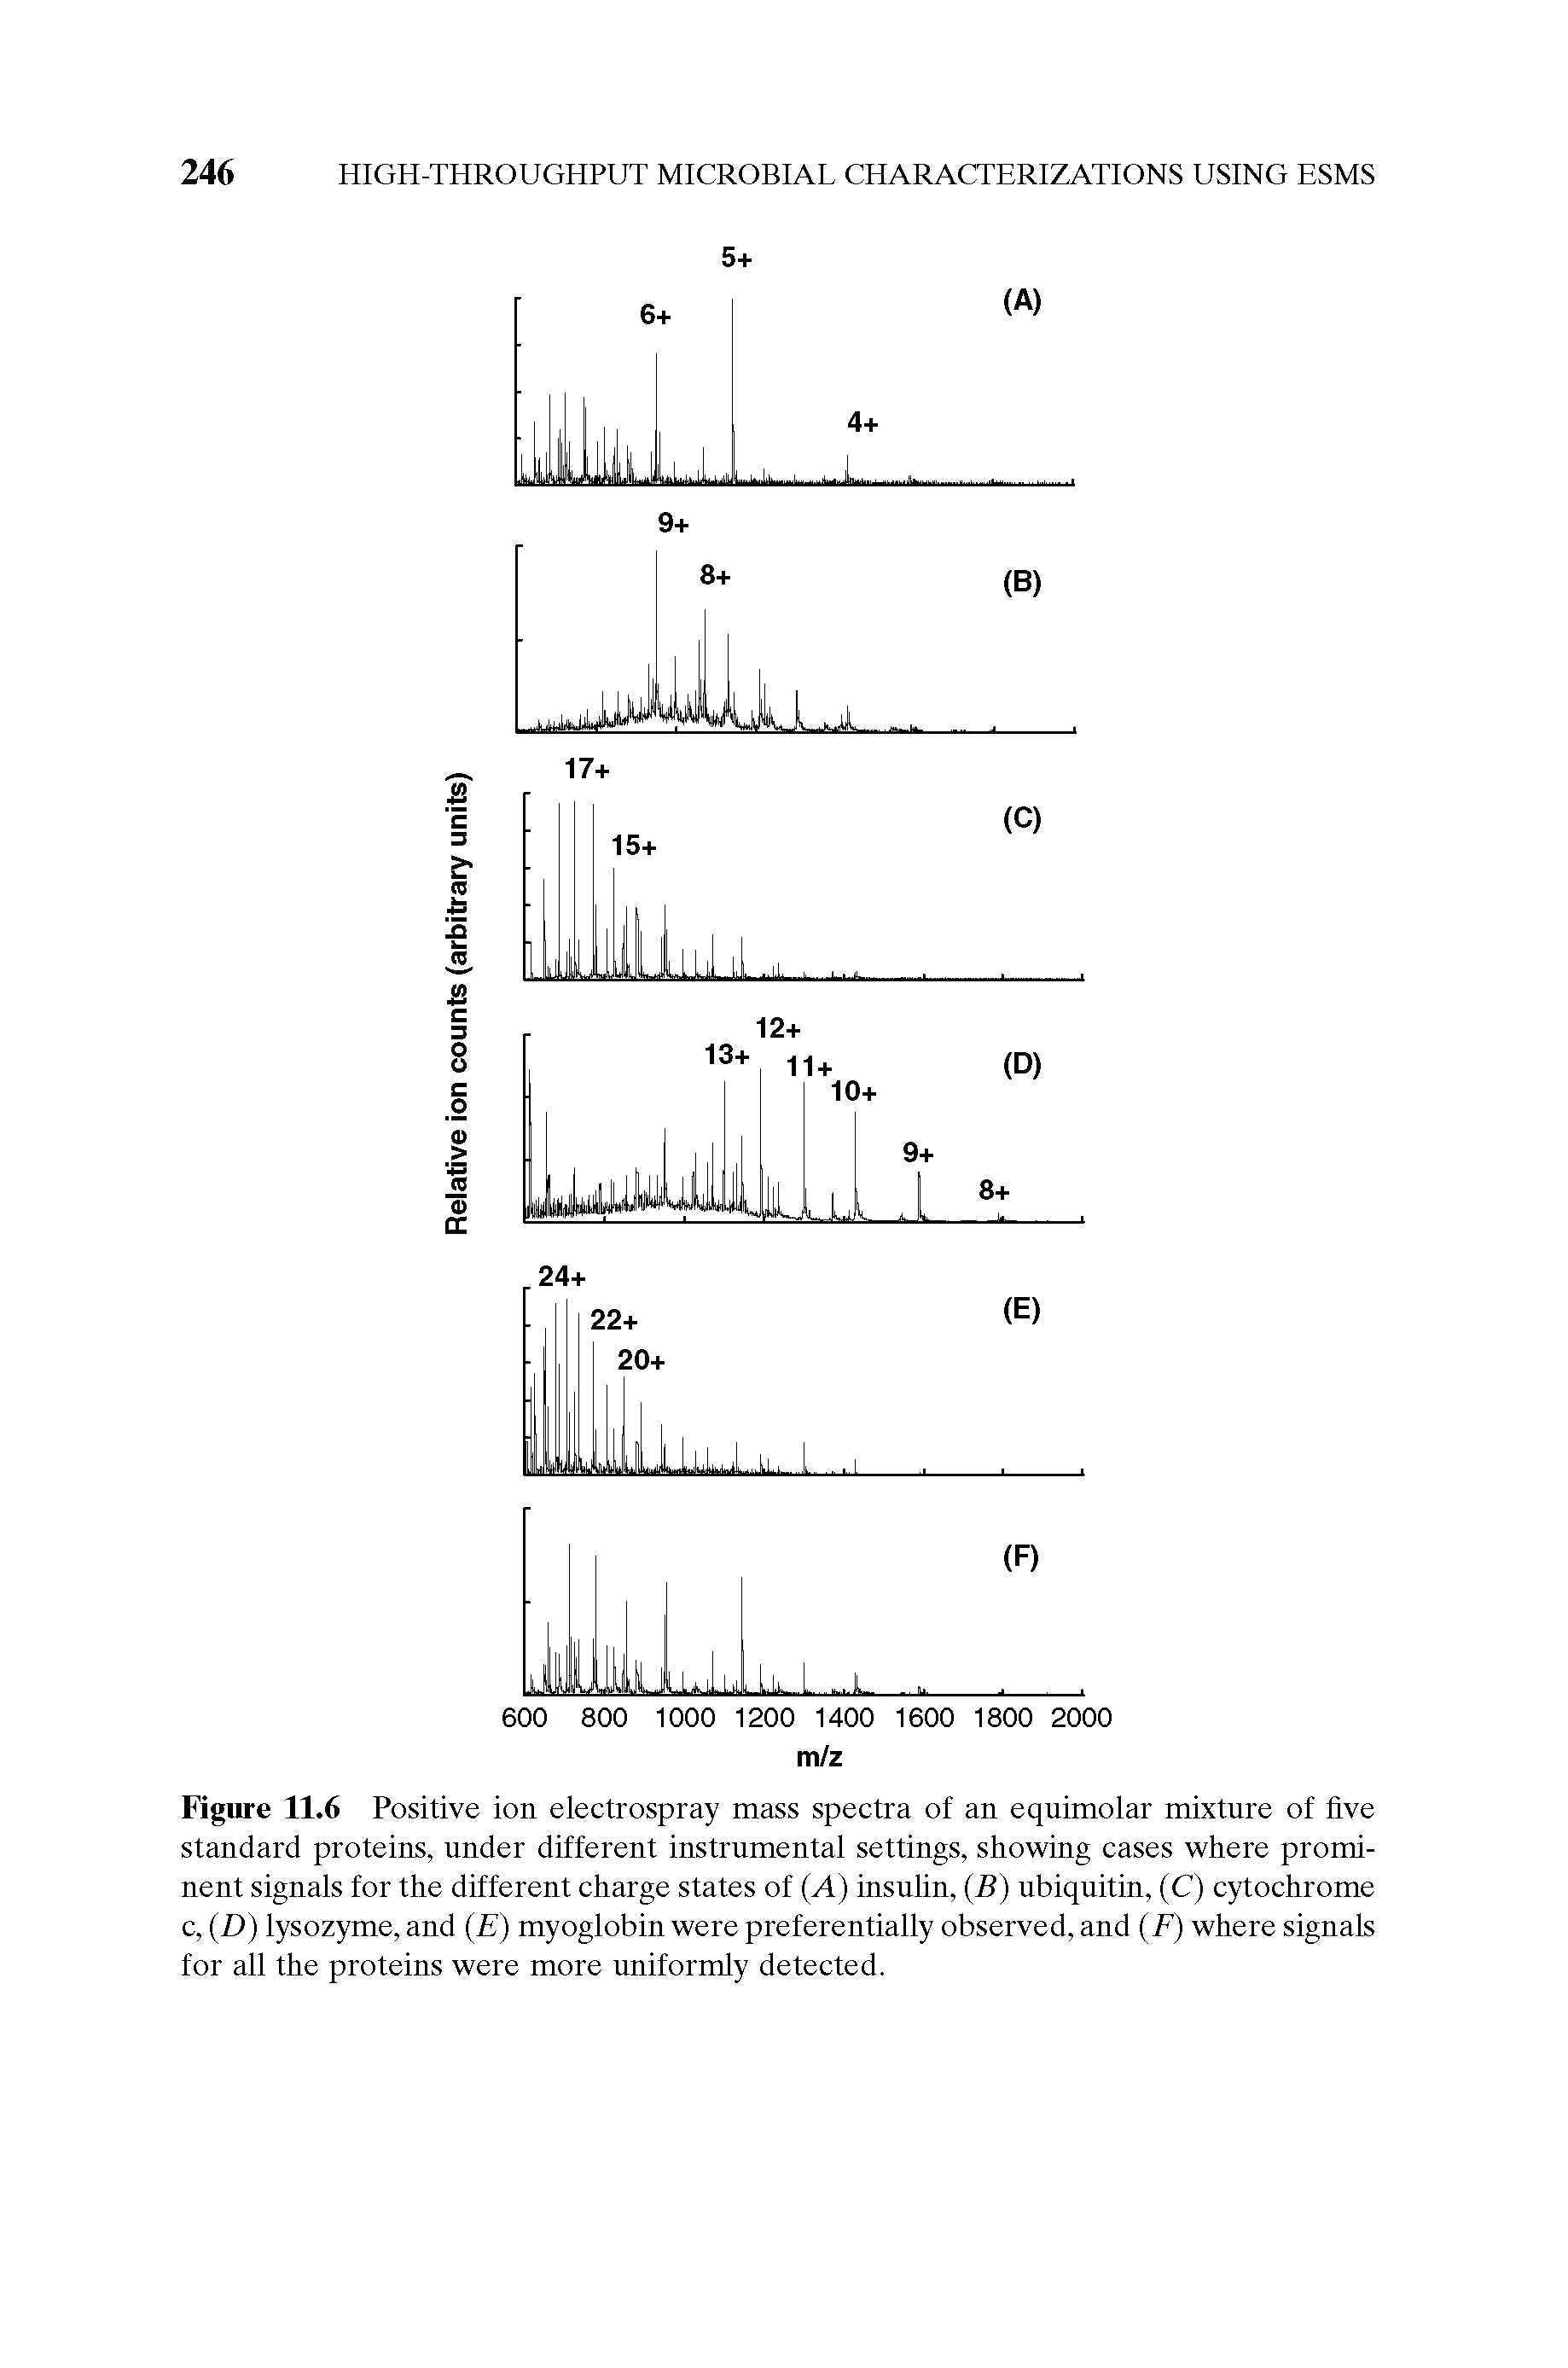 Figure 11.6 Positive ion electrospray mass spectra of an equimolar mixture of five standard proteins, under different instrumental settings, showing cases where prominent signals for the different charge states of (A) insulin, (B) ubiquitin, (C) cytochrome c, (D) lysozyme, and (E) myoglobin were preferentially observed, and (F) where signals for all the proteins were more uniformly detected.